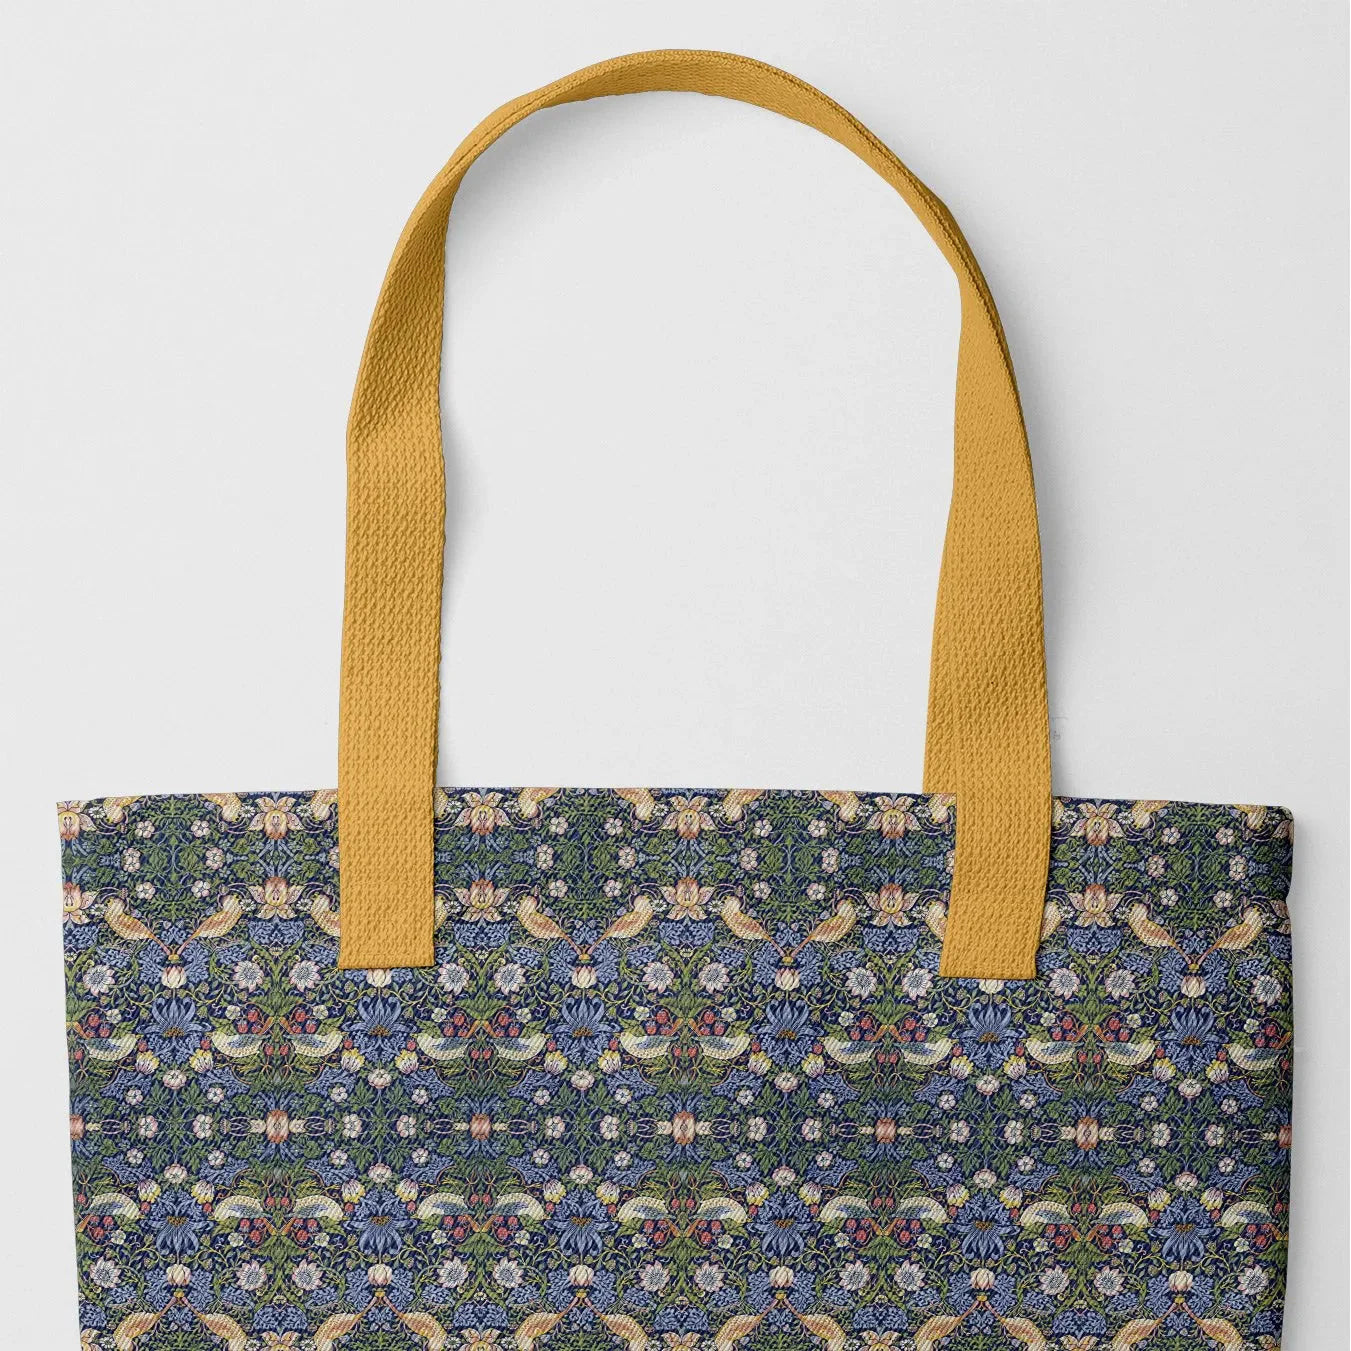 Strawberry Thief Tote - Heavy Duty Reusable Grocery Bag - Yellow - Shopping Totes - Aesthetic Art